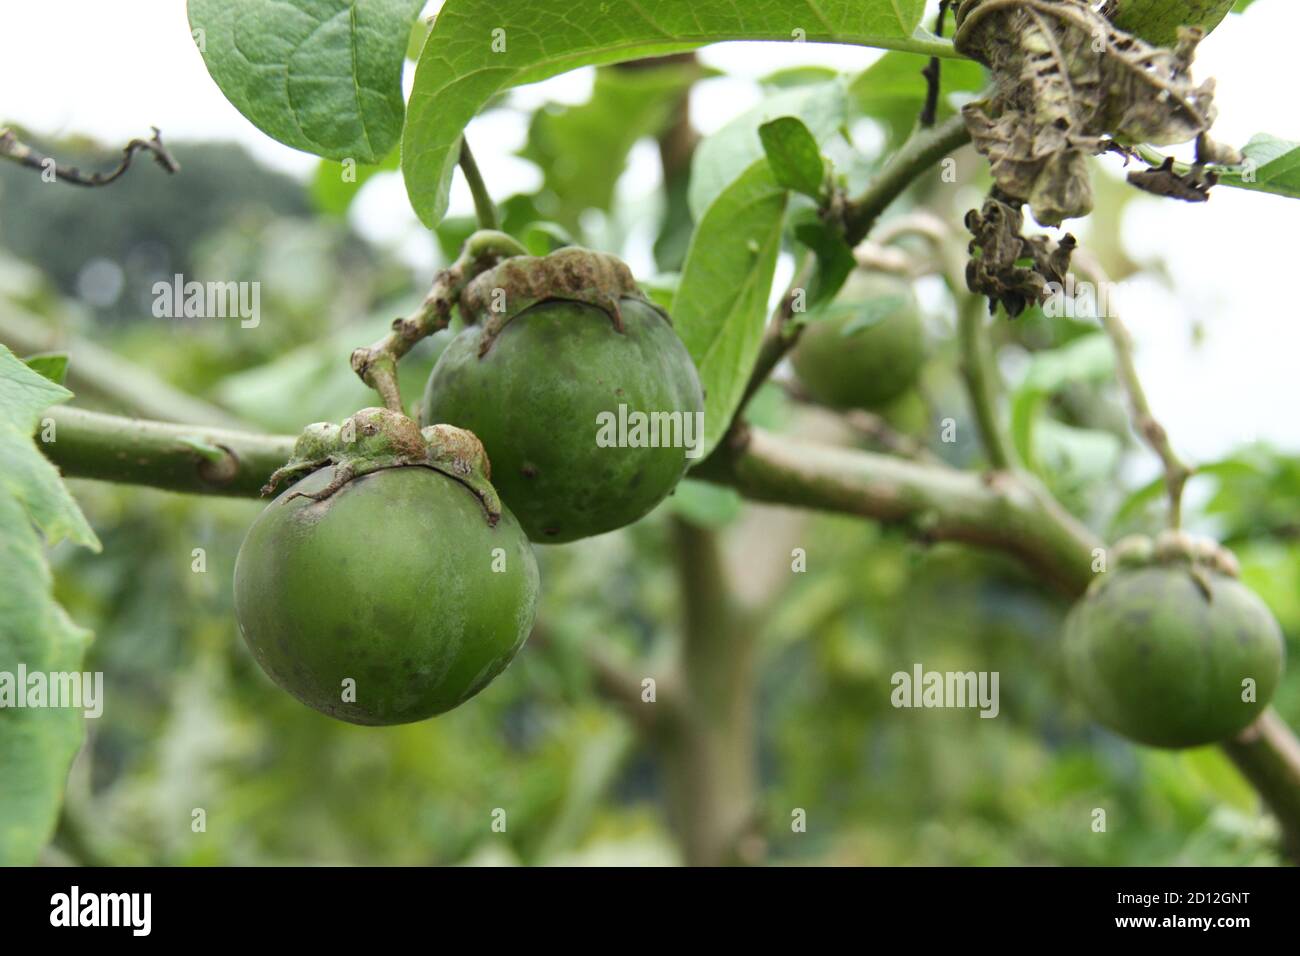 mangosteen tree (Garcinia mangostana) which bears fruit. green mangosteen that is still raw against a background of green gardens. lush tropical plant Stock Photo